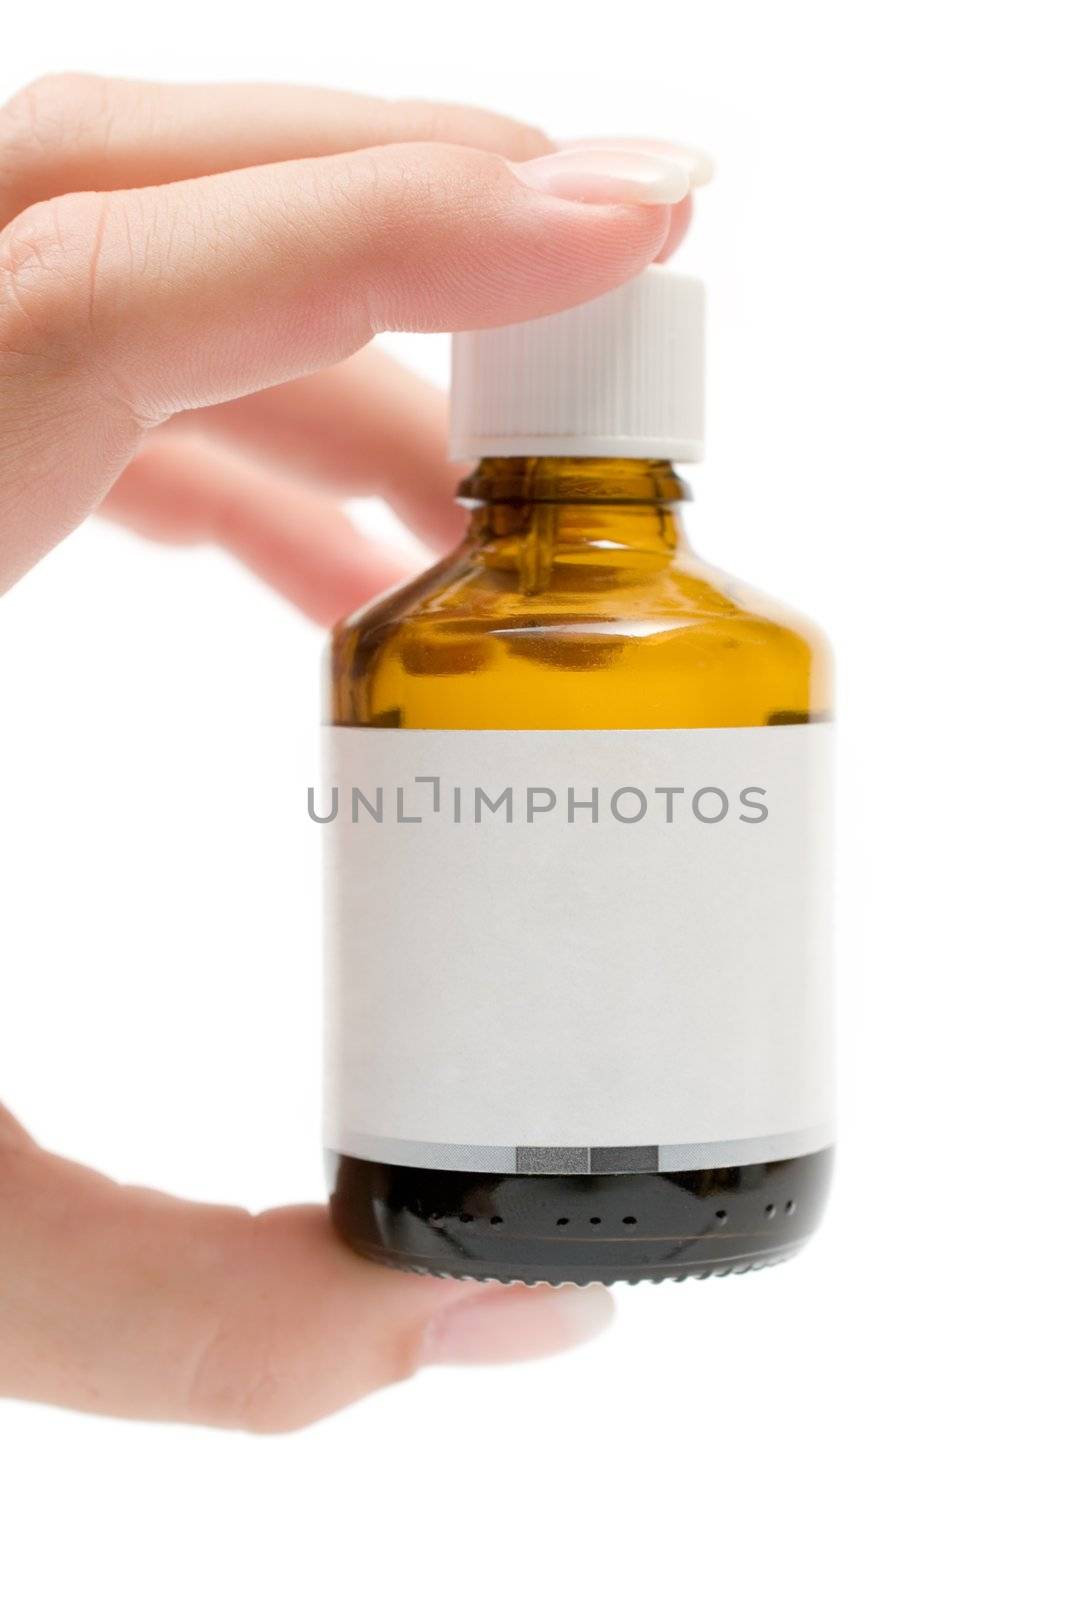 Female hand holding a small bottle. Blank Label. Isolated on a white background.